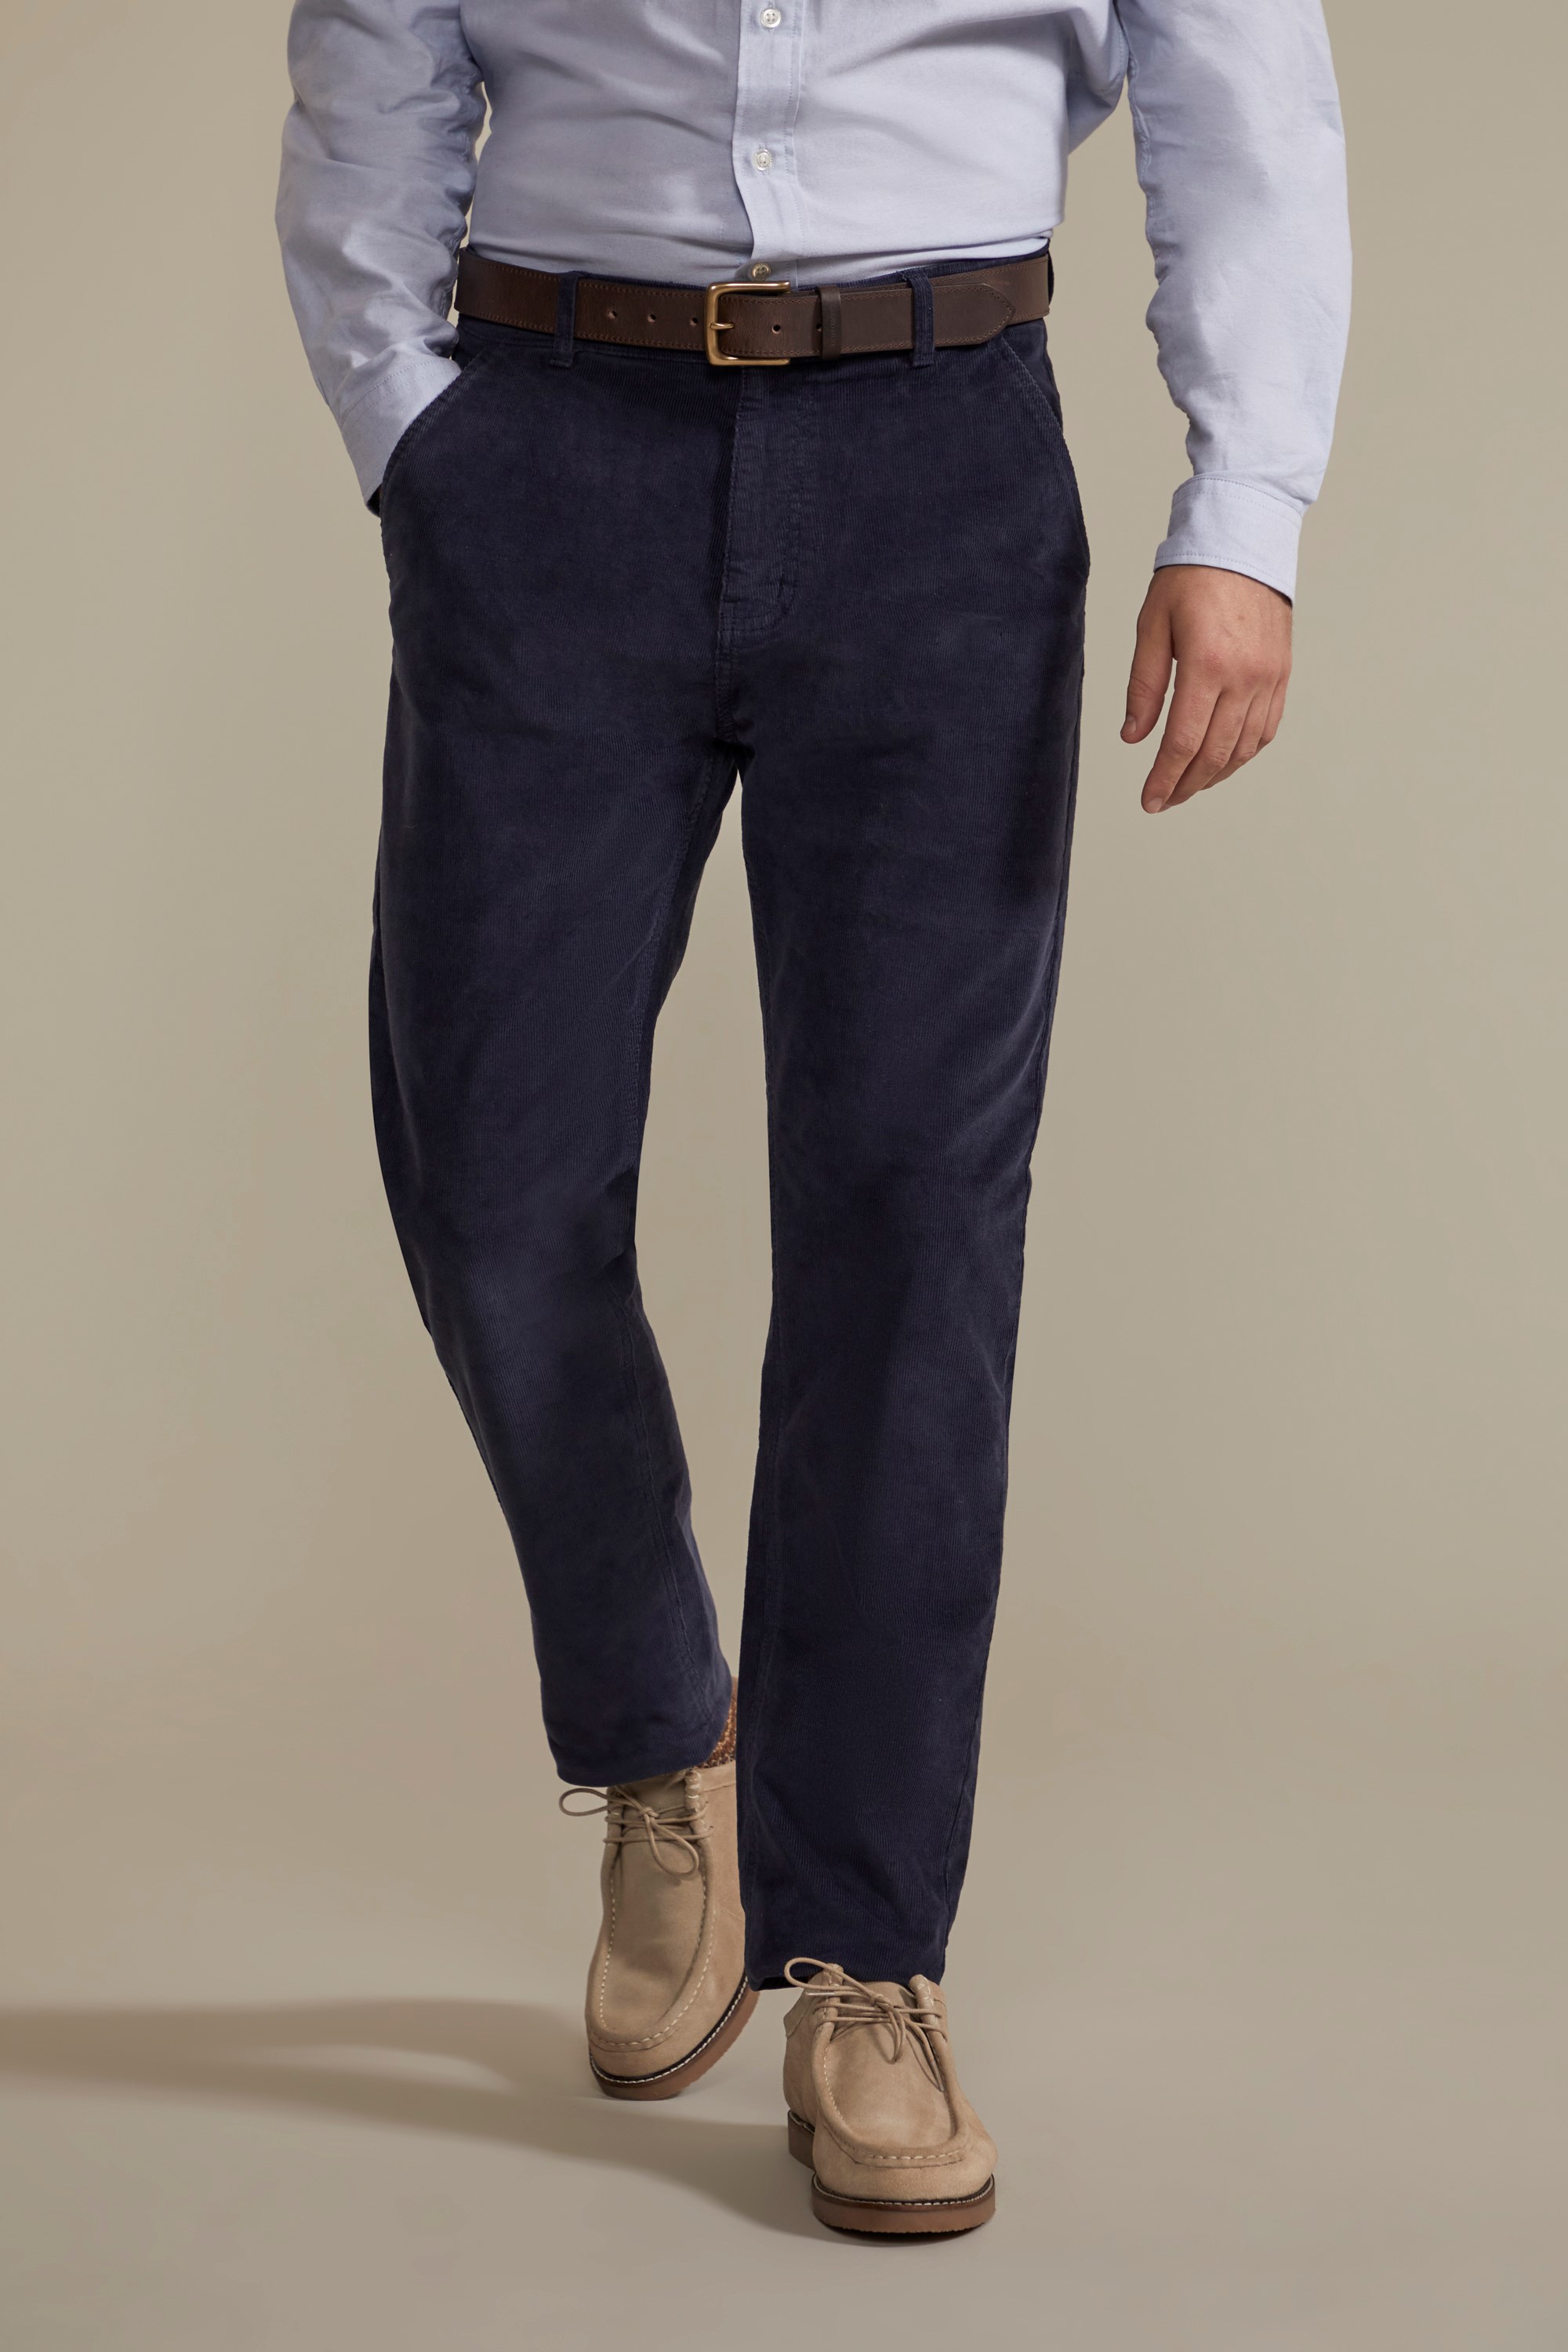 Navy Blue Corduroy Trousers  Mens Country Clothing  Cordings